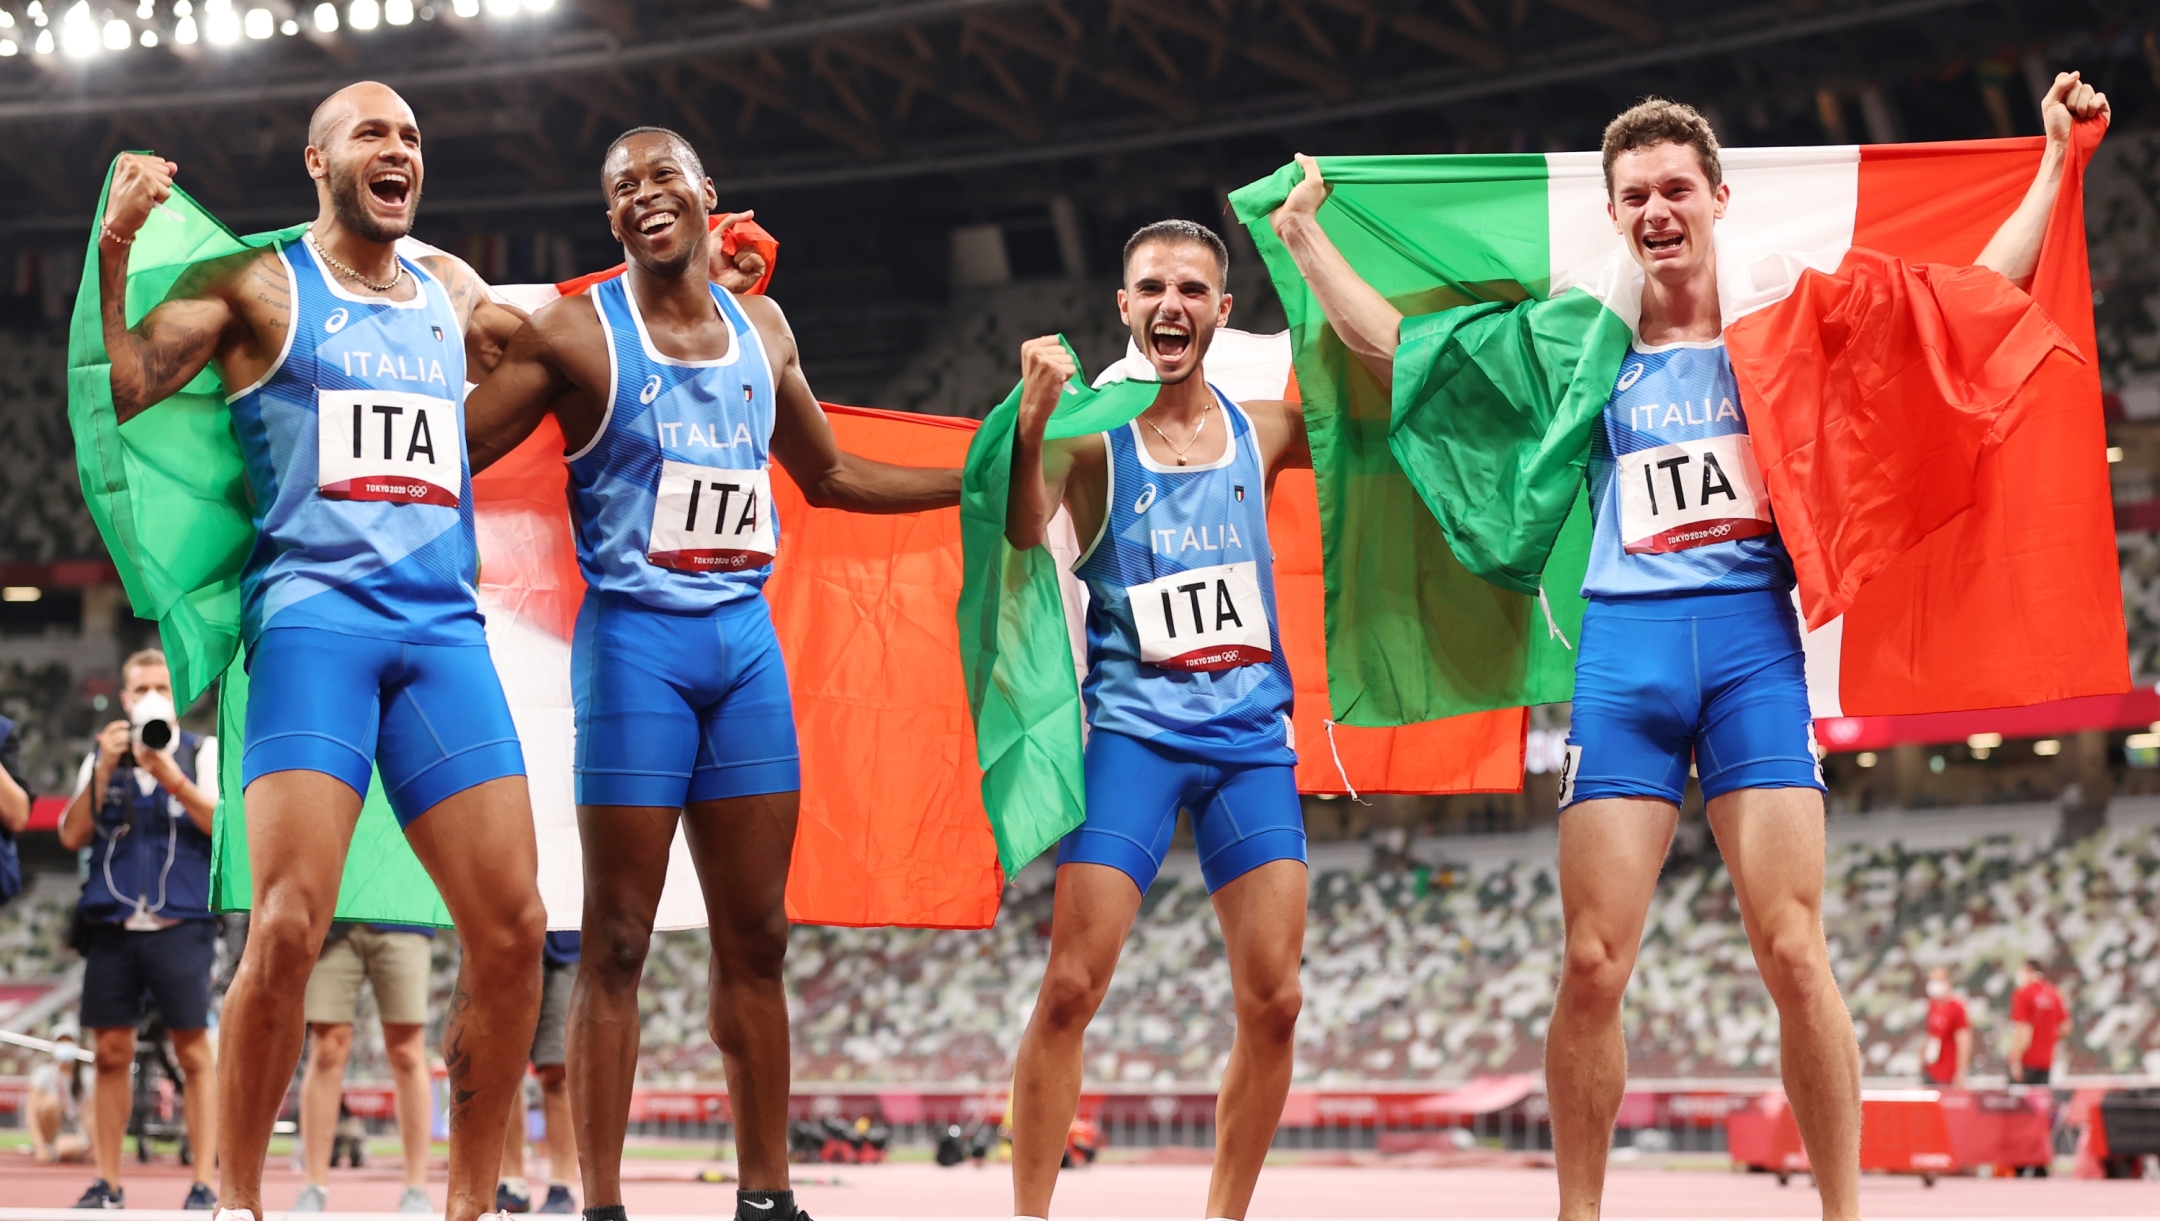 TOKYO, JAPAN - AUGUST 06: Lorenzo Patta, Lamont Marcell Jacobs, Eseosa Fostine Desalu and Filippo Tortu of Team Italy celebrate winning the gold medal in the Men's 4 x 100m Relay Final on day fourteen of the Tokyo 2020 Olympic Games at Olympic Stadium on August 06, 2021 in Tokyo, Japan. (Photo by David Ramos/Getty Images)